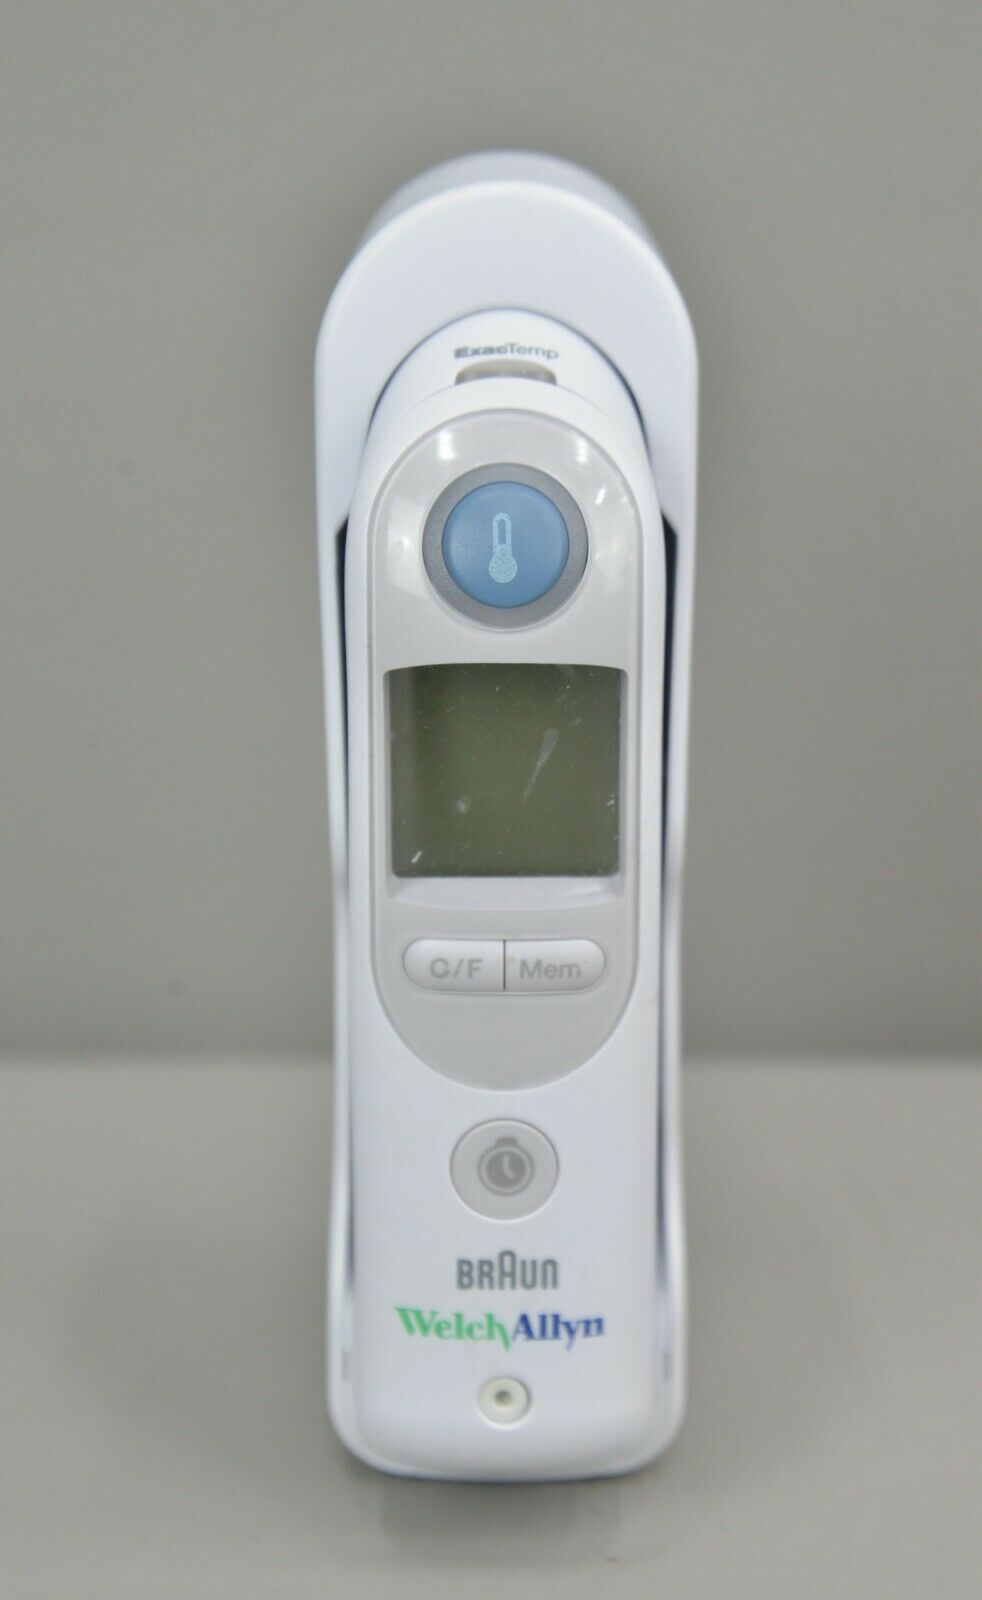 https://www.rhinotradellc.com/wp-content/uploads/imported/5/Welch-Allyn-Braun-ThermoScan-Pro-6000-Ear-Thermometer-REF-901054-265624548185.jpg